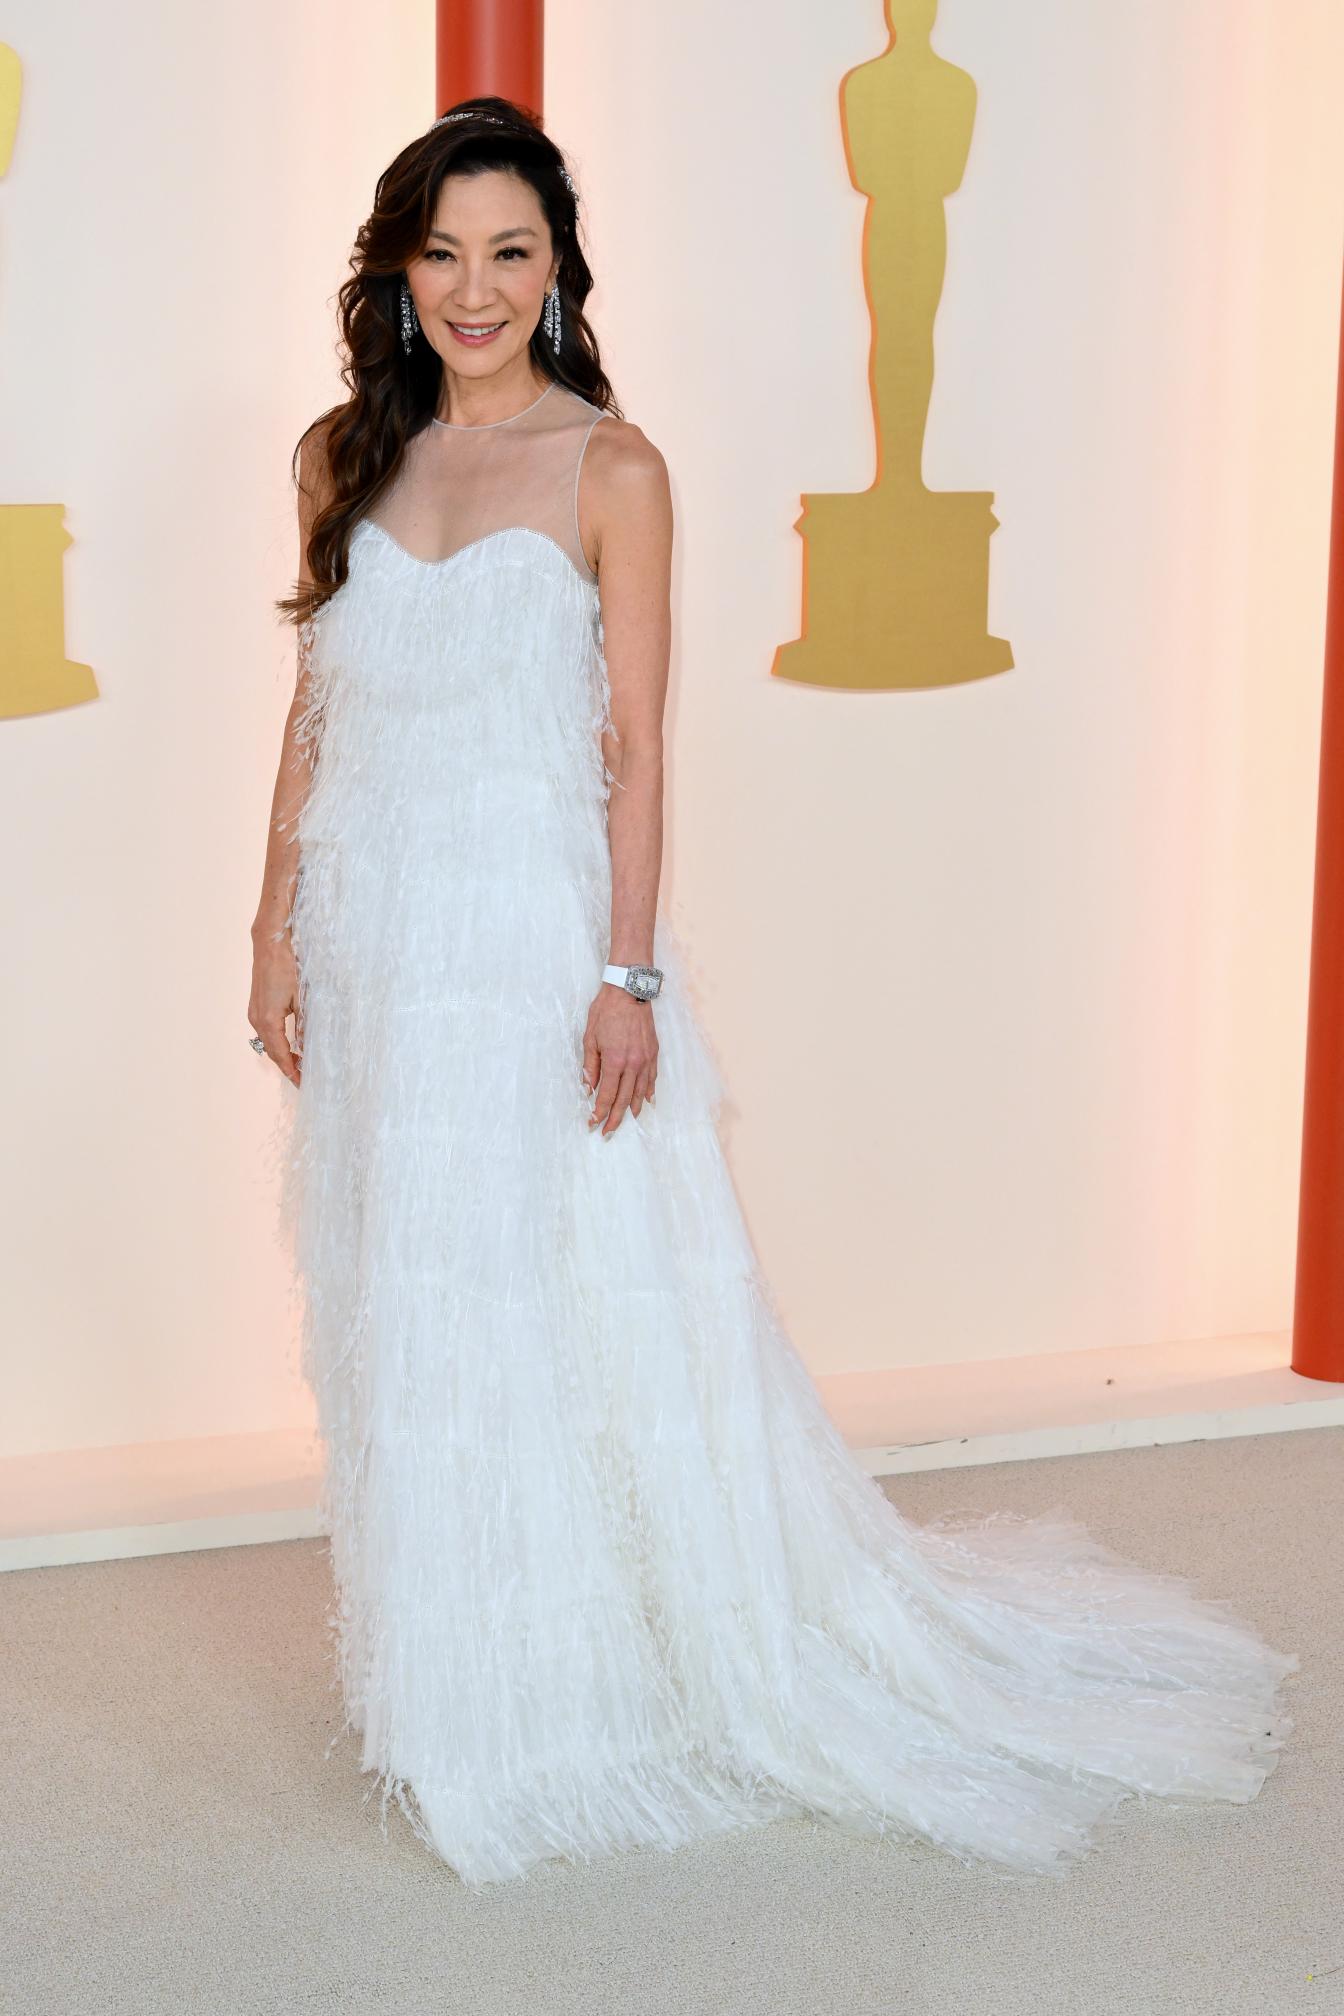 Malaysian actress Michelle Yeoh attends the 95th Annual Academy Awards at the Dolby Theatre in Hollywood